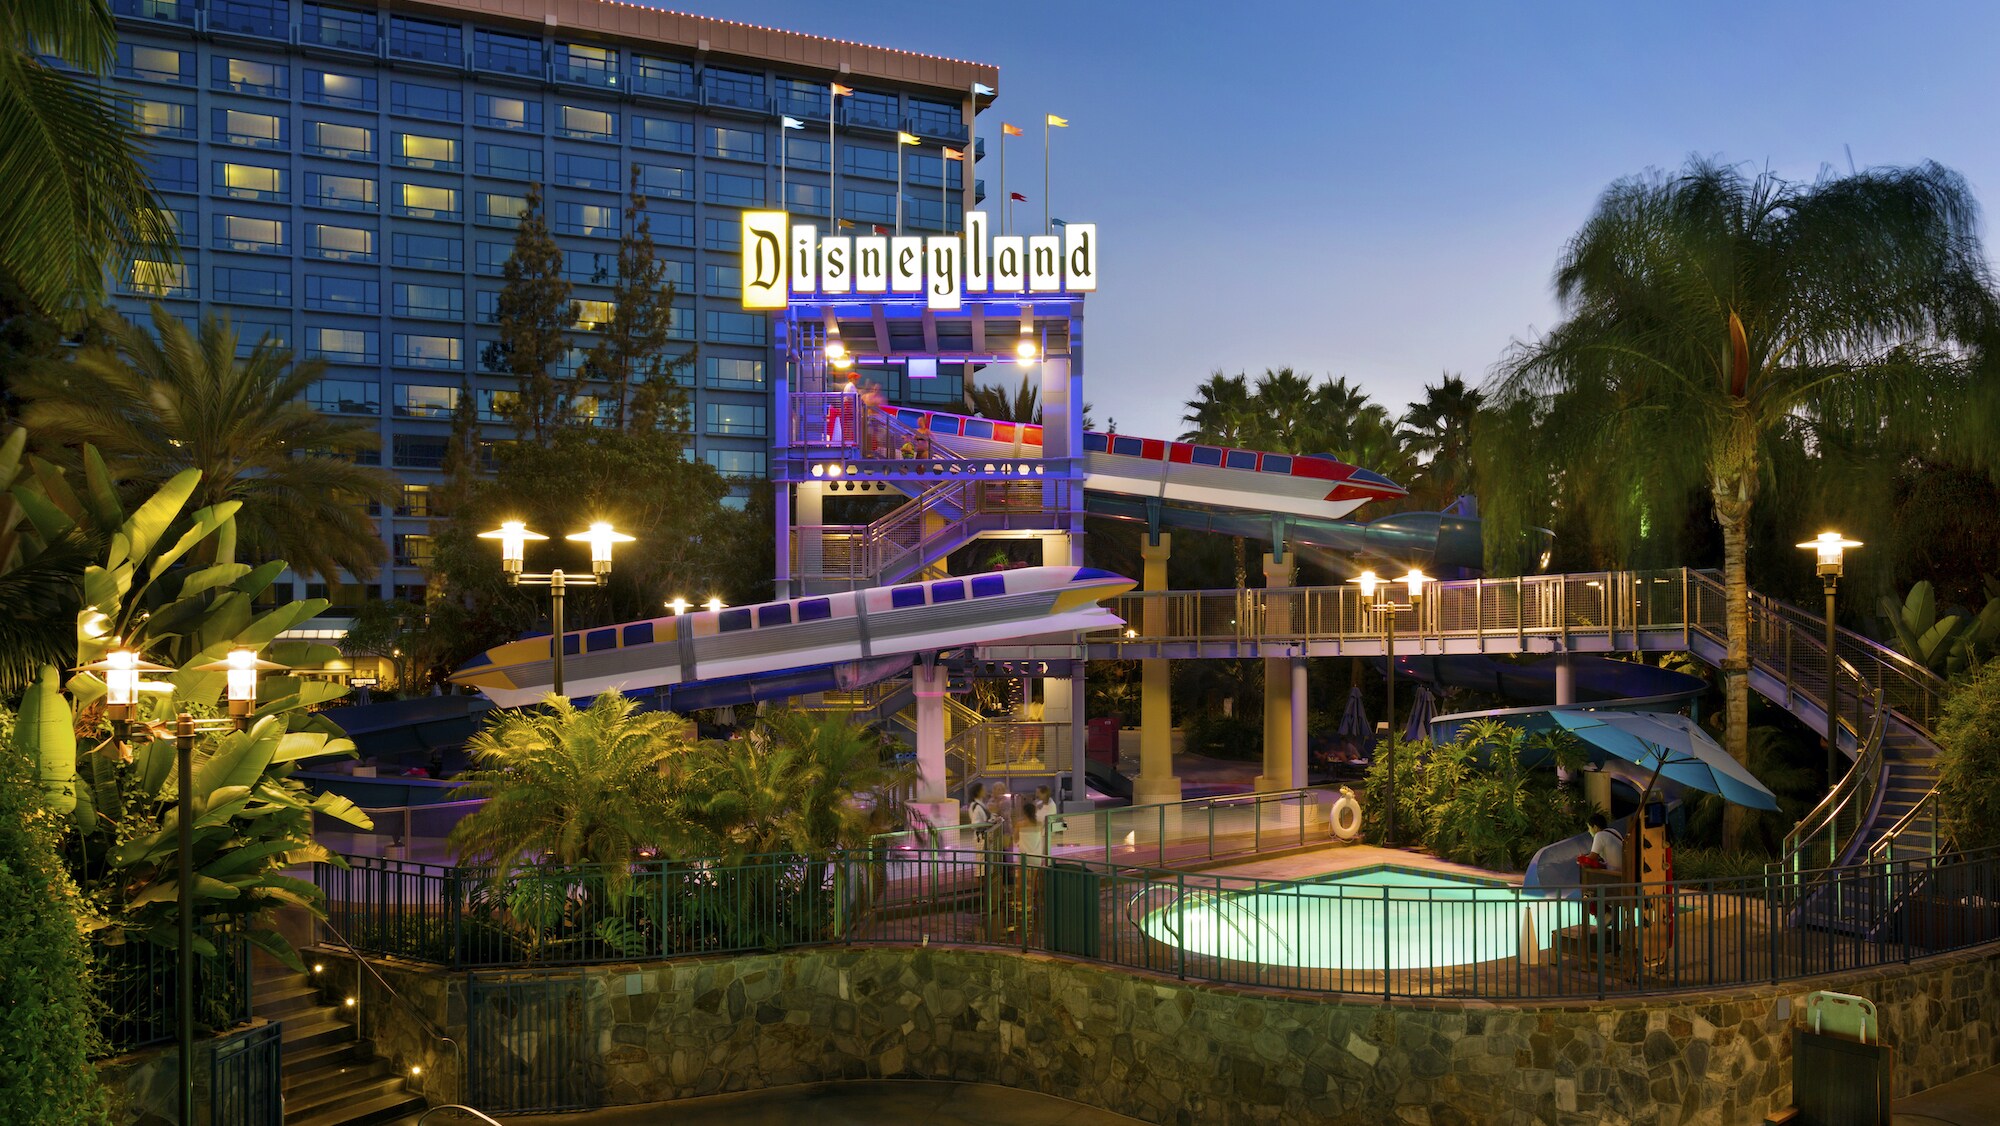 Image of the pool lit at dusk at the Disneyland Hotel.